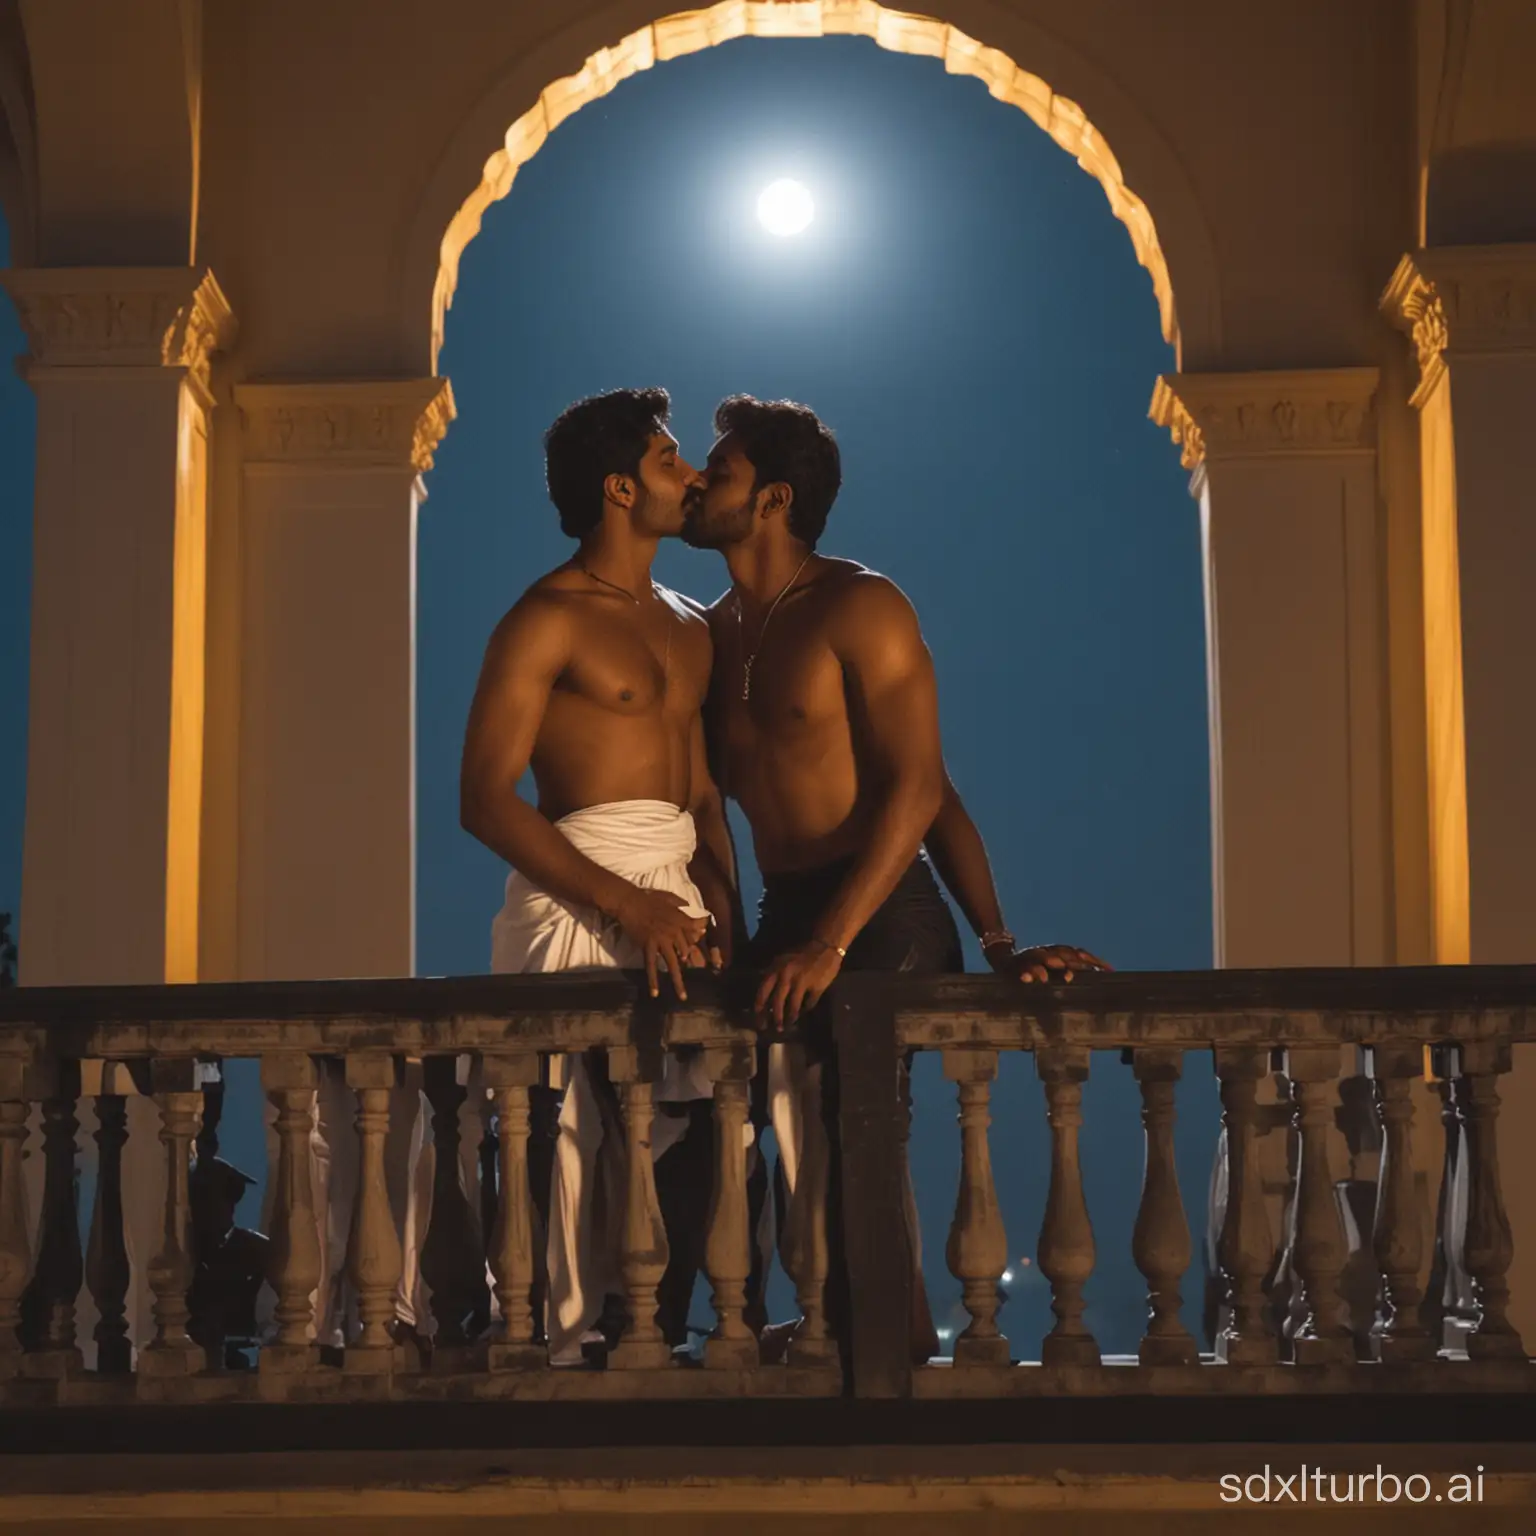 Two Tamil guys kissing each other on their palace balcony, no dress, under moonlight